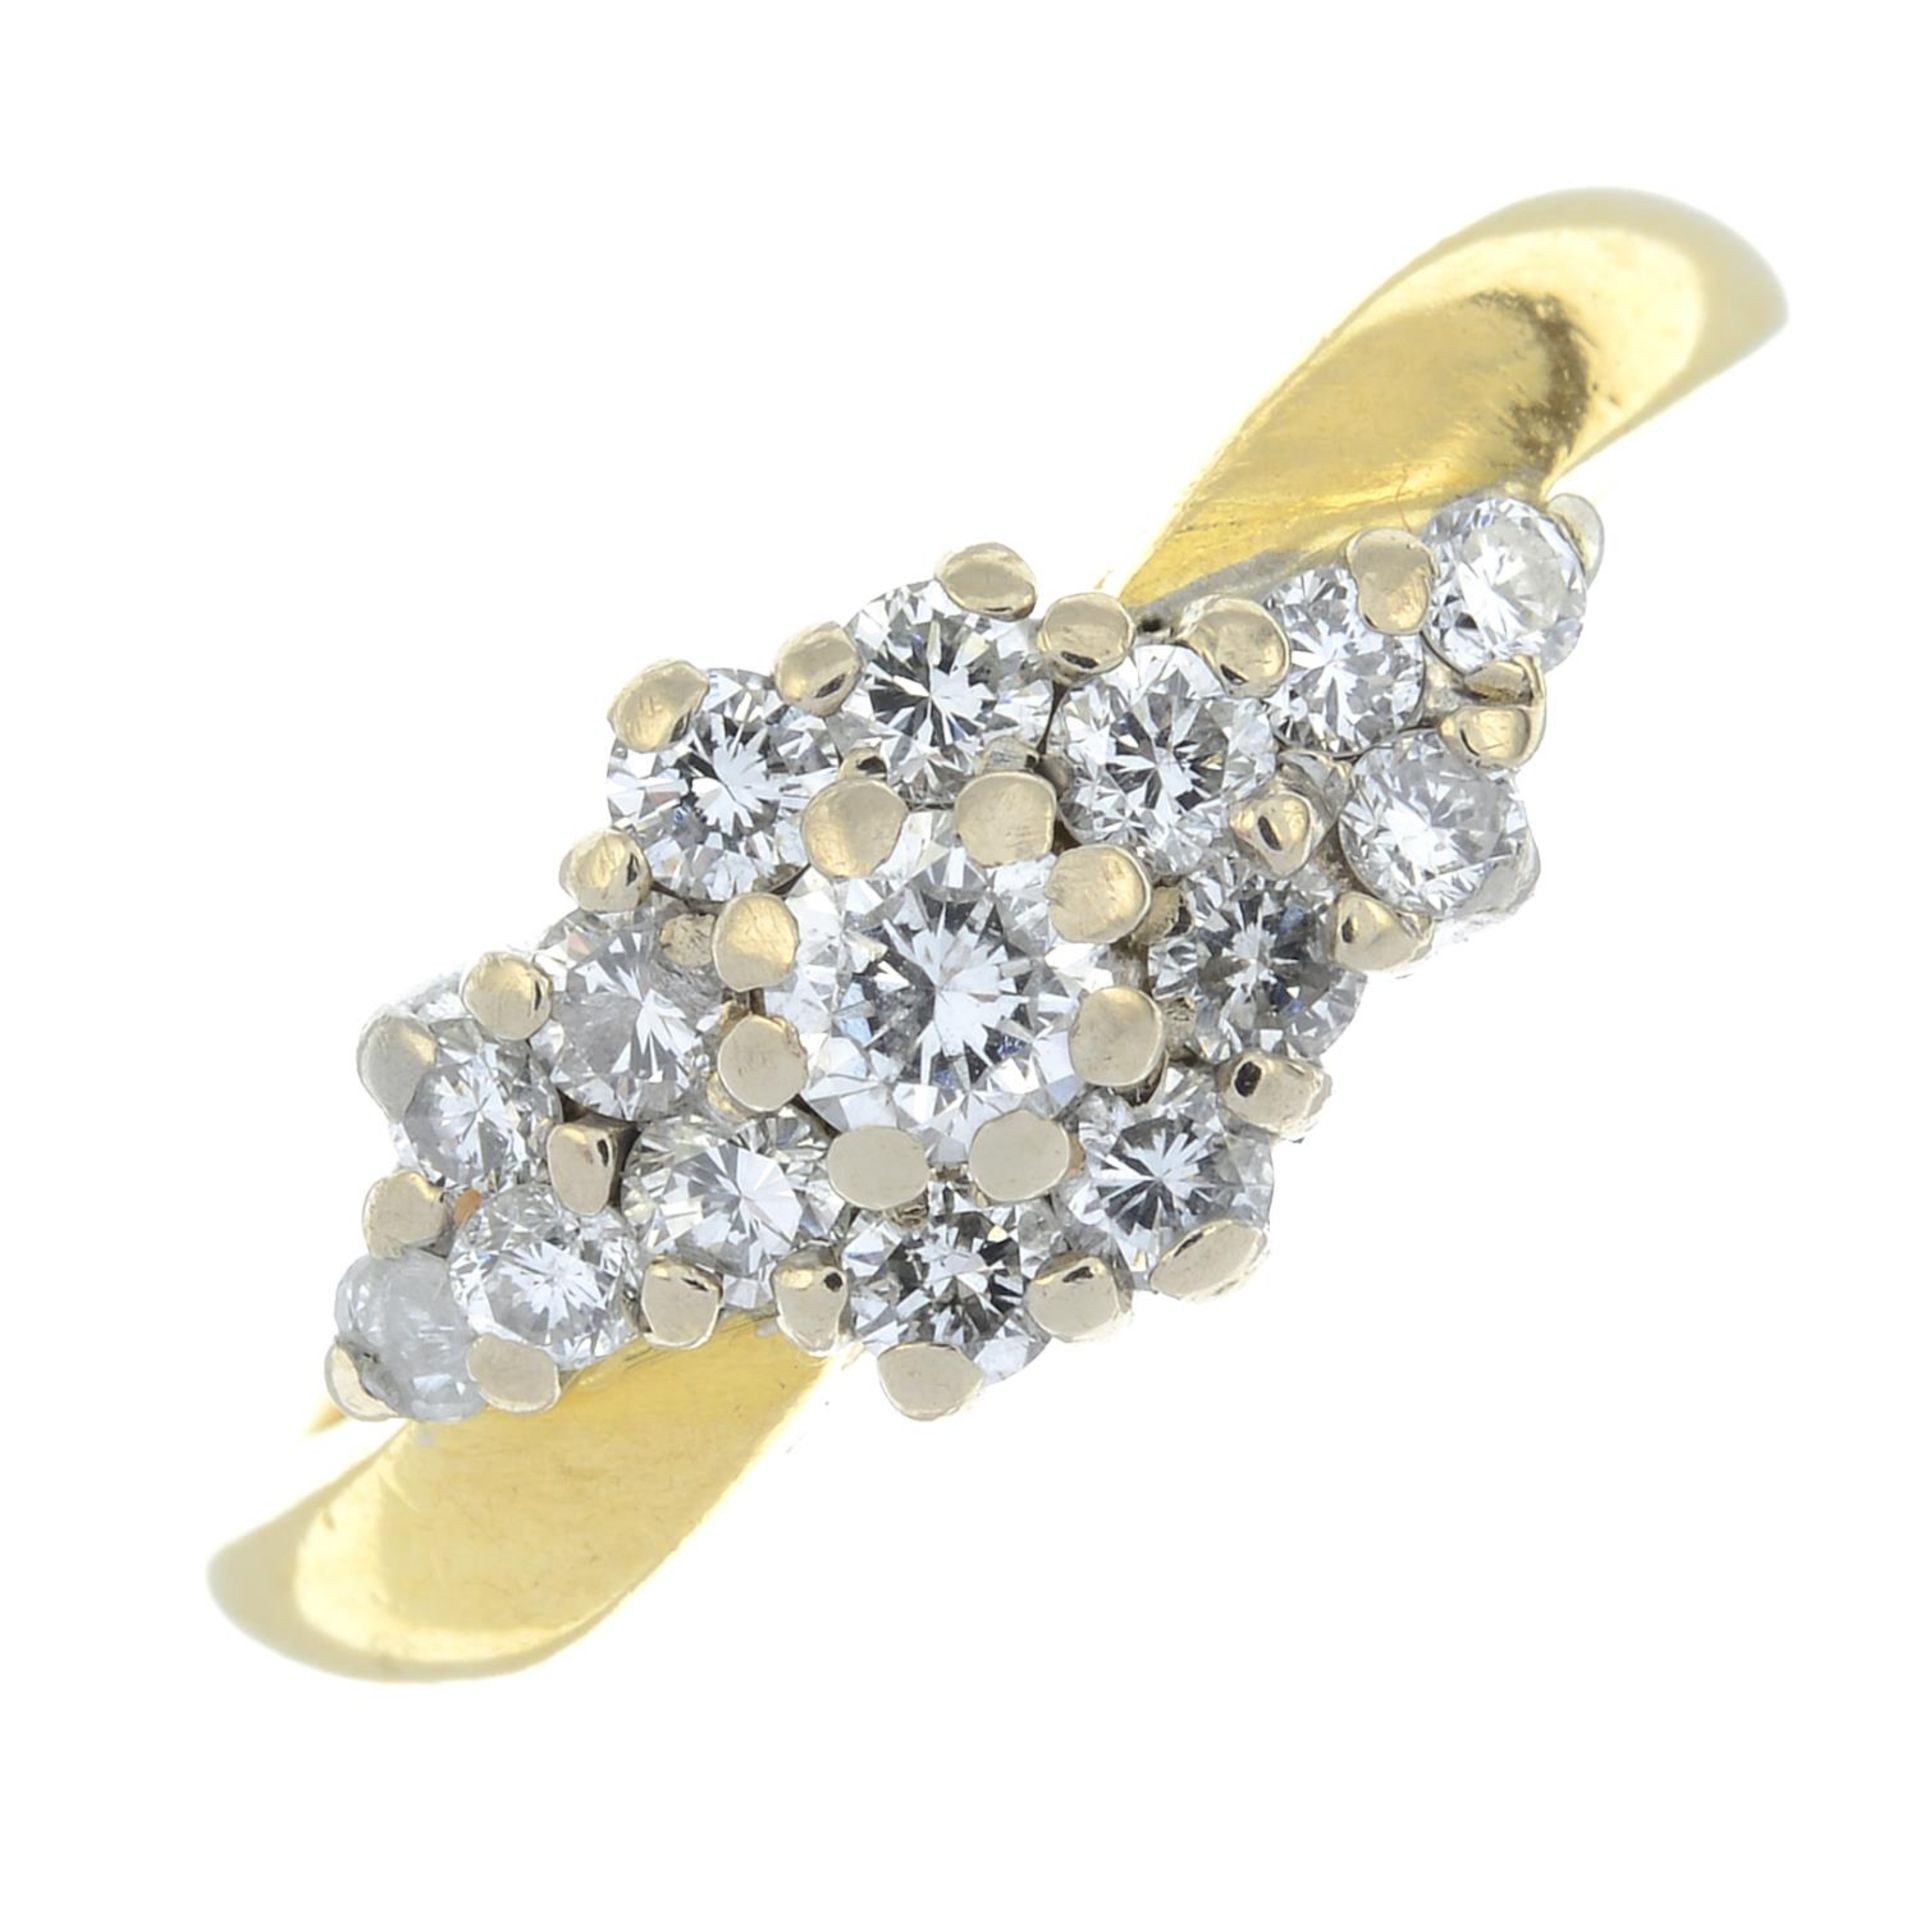 An 18ct gold brilliant-cut diamond cluster ring.Estimated total diamond weight 0.50ct.Hallmarks for